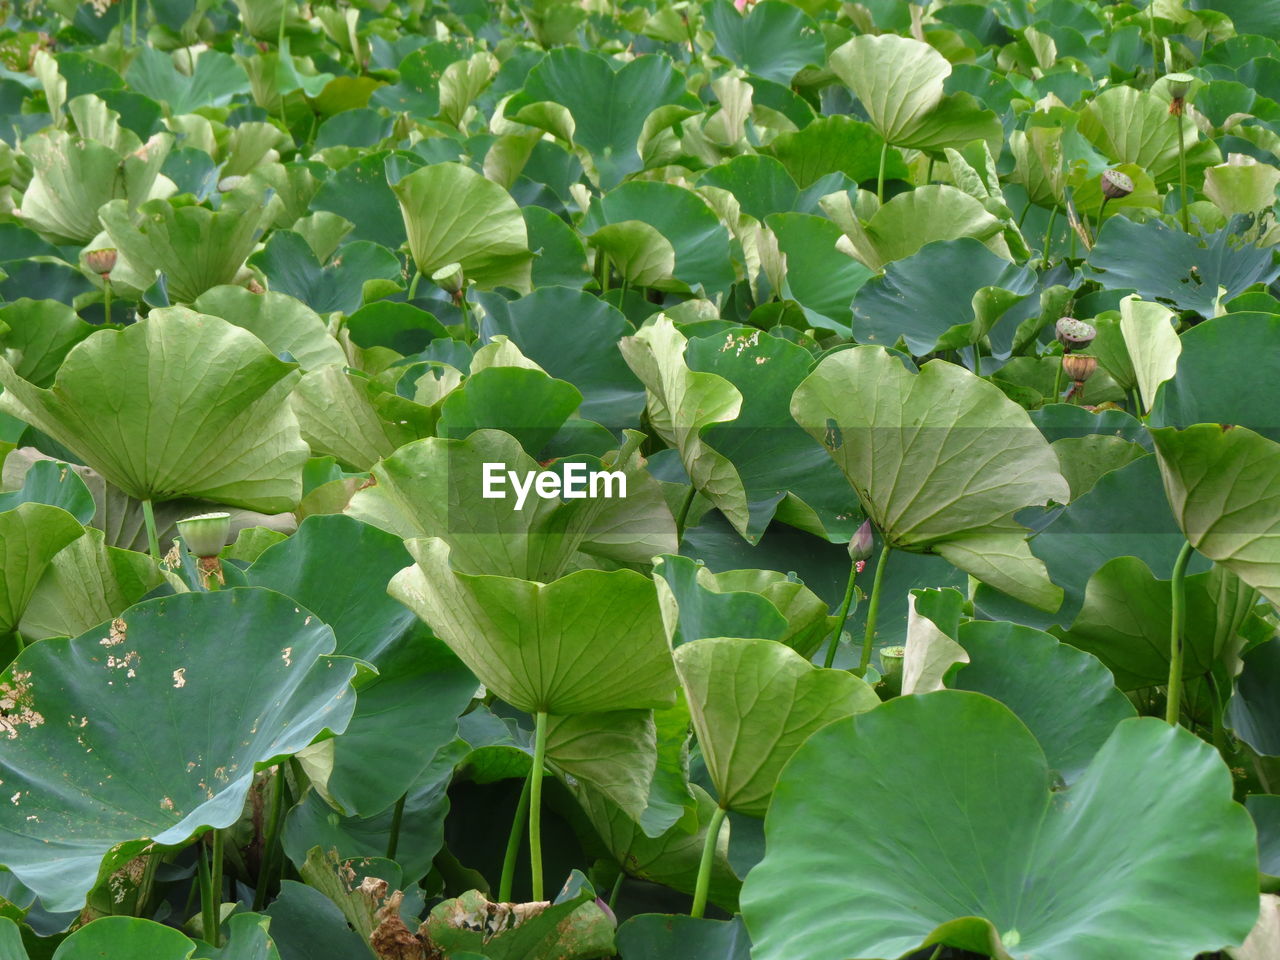 The surface of lotus leaves is superhydrophobic